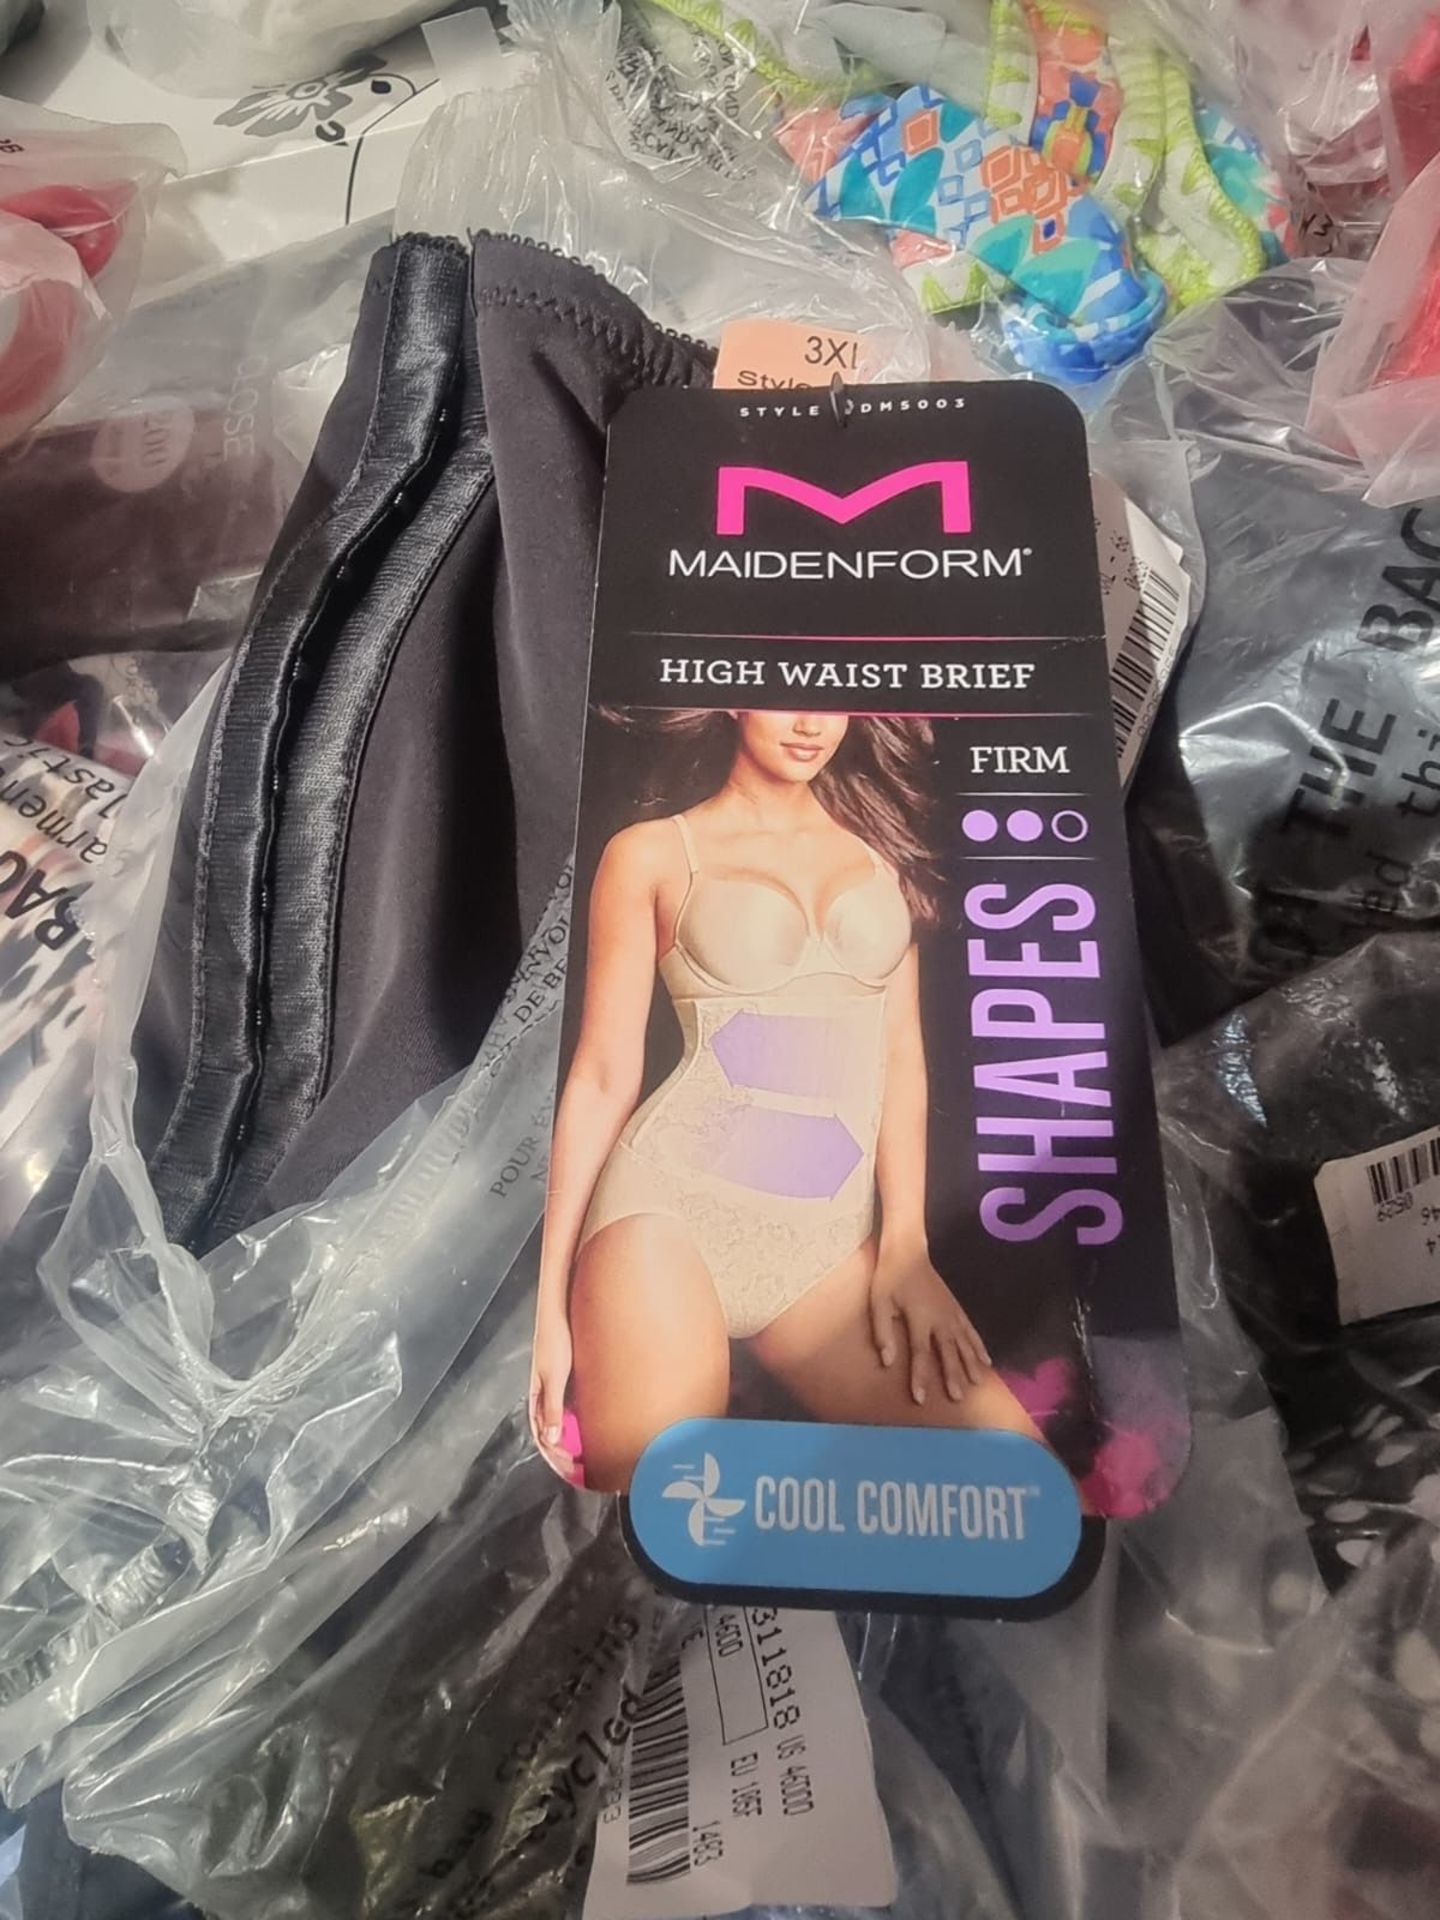 100 x NEW PACKAGED ASSORTED SWIM & UNDERWEAR FROM BRAND SUCH AS WONDERBRA, BOUX AVENUE, ANN SUMMERS, - Image 13 of 53